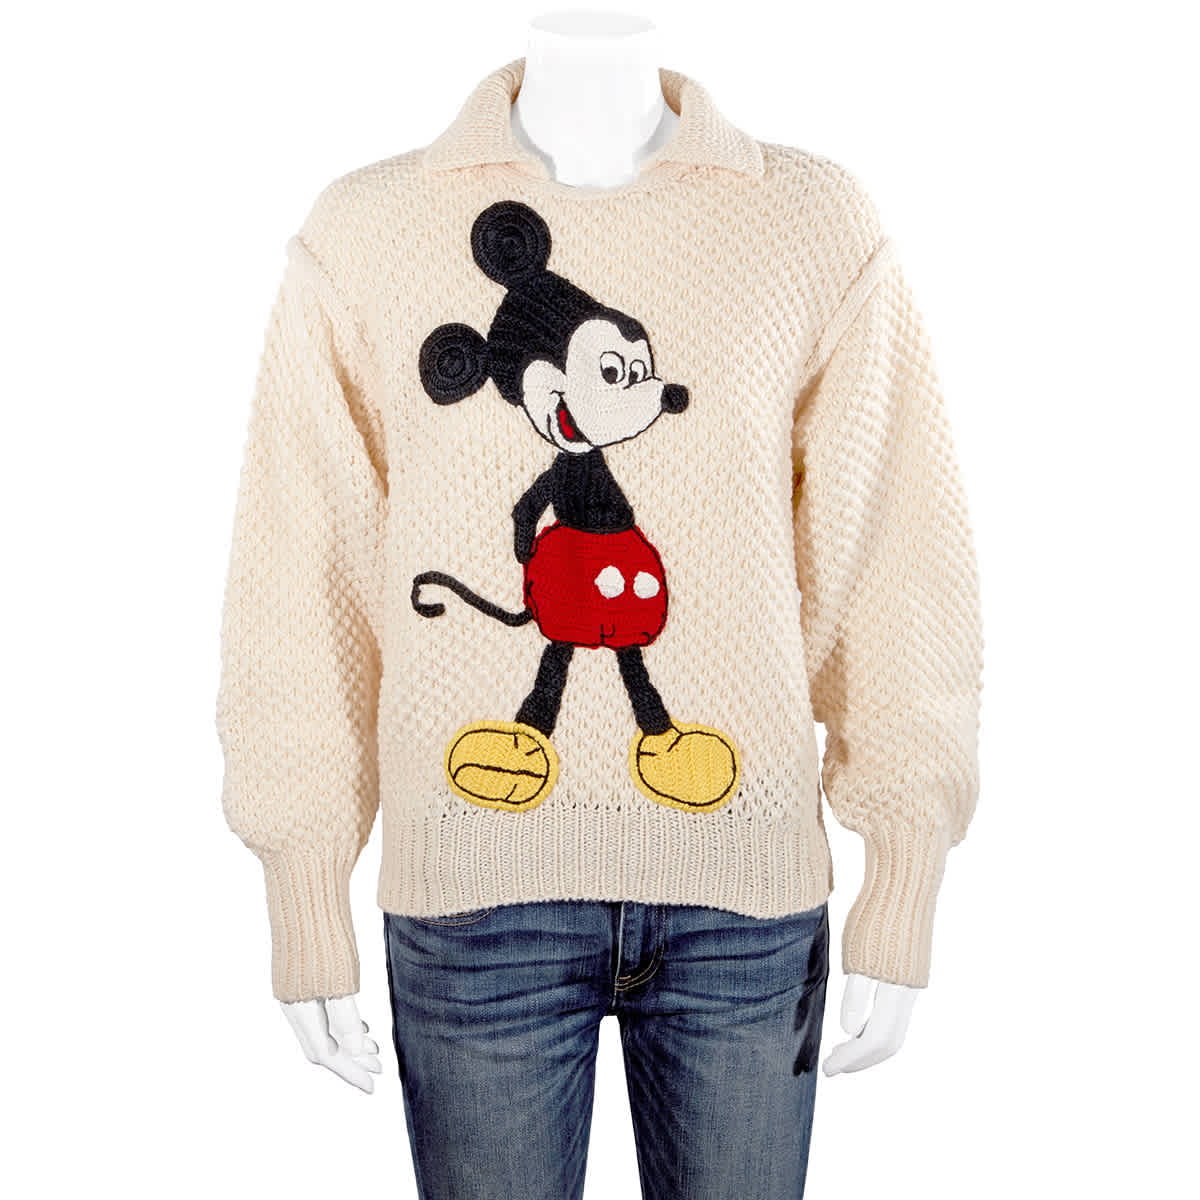 Gucci X Disney Embroidered Mickey Mouse Jumper, Brand Size X-Small 